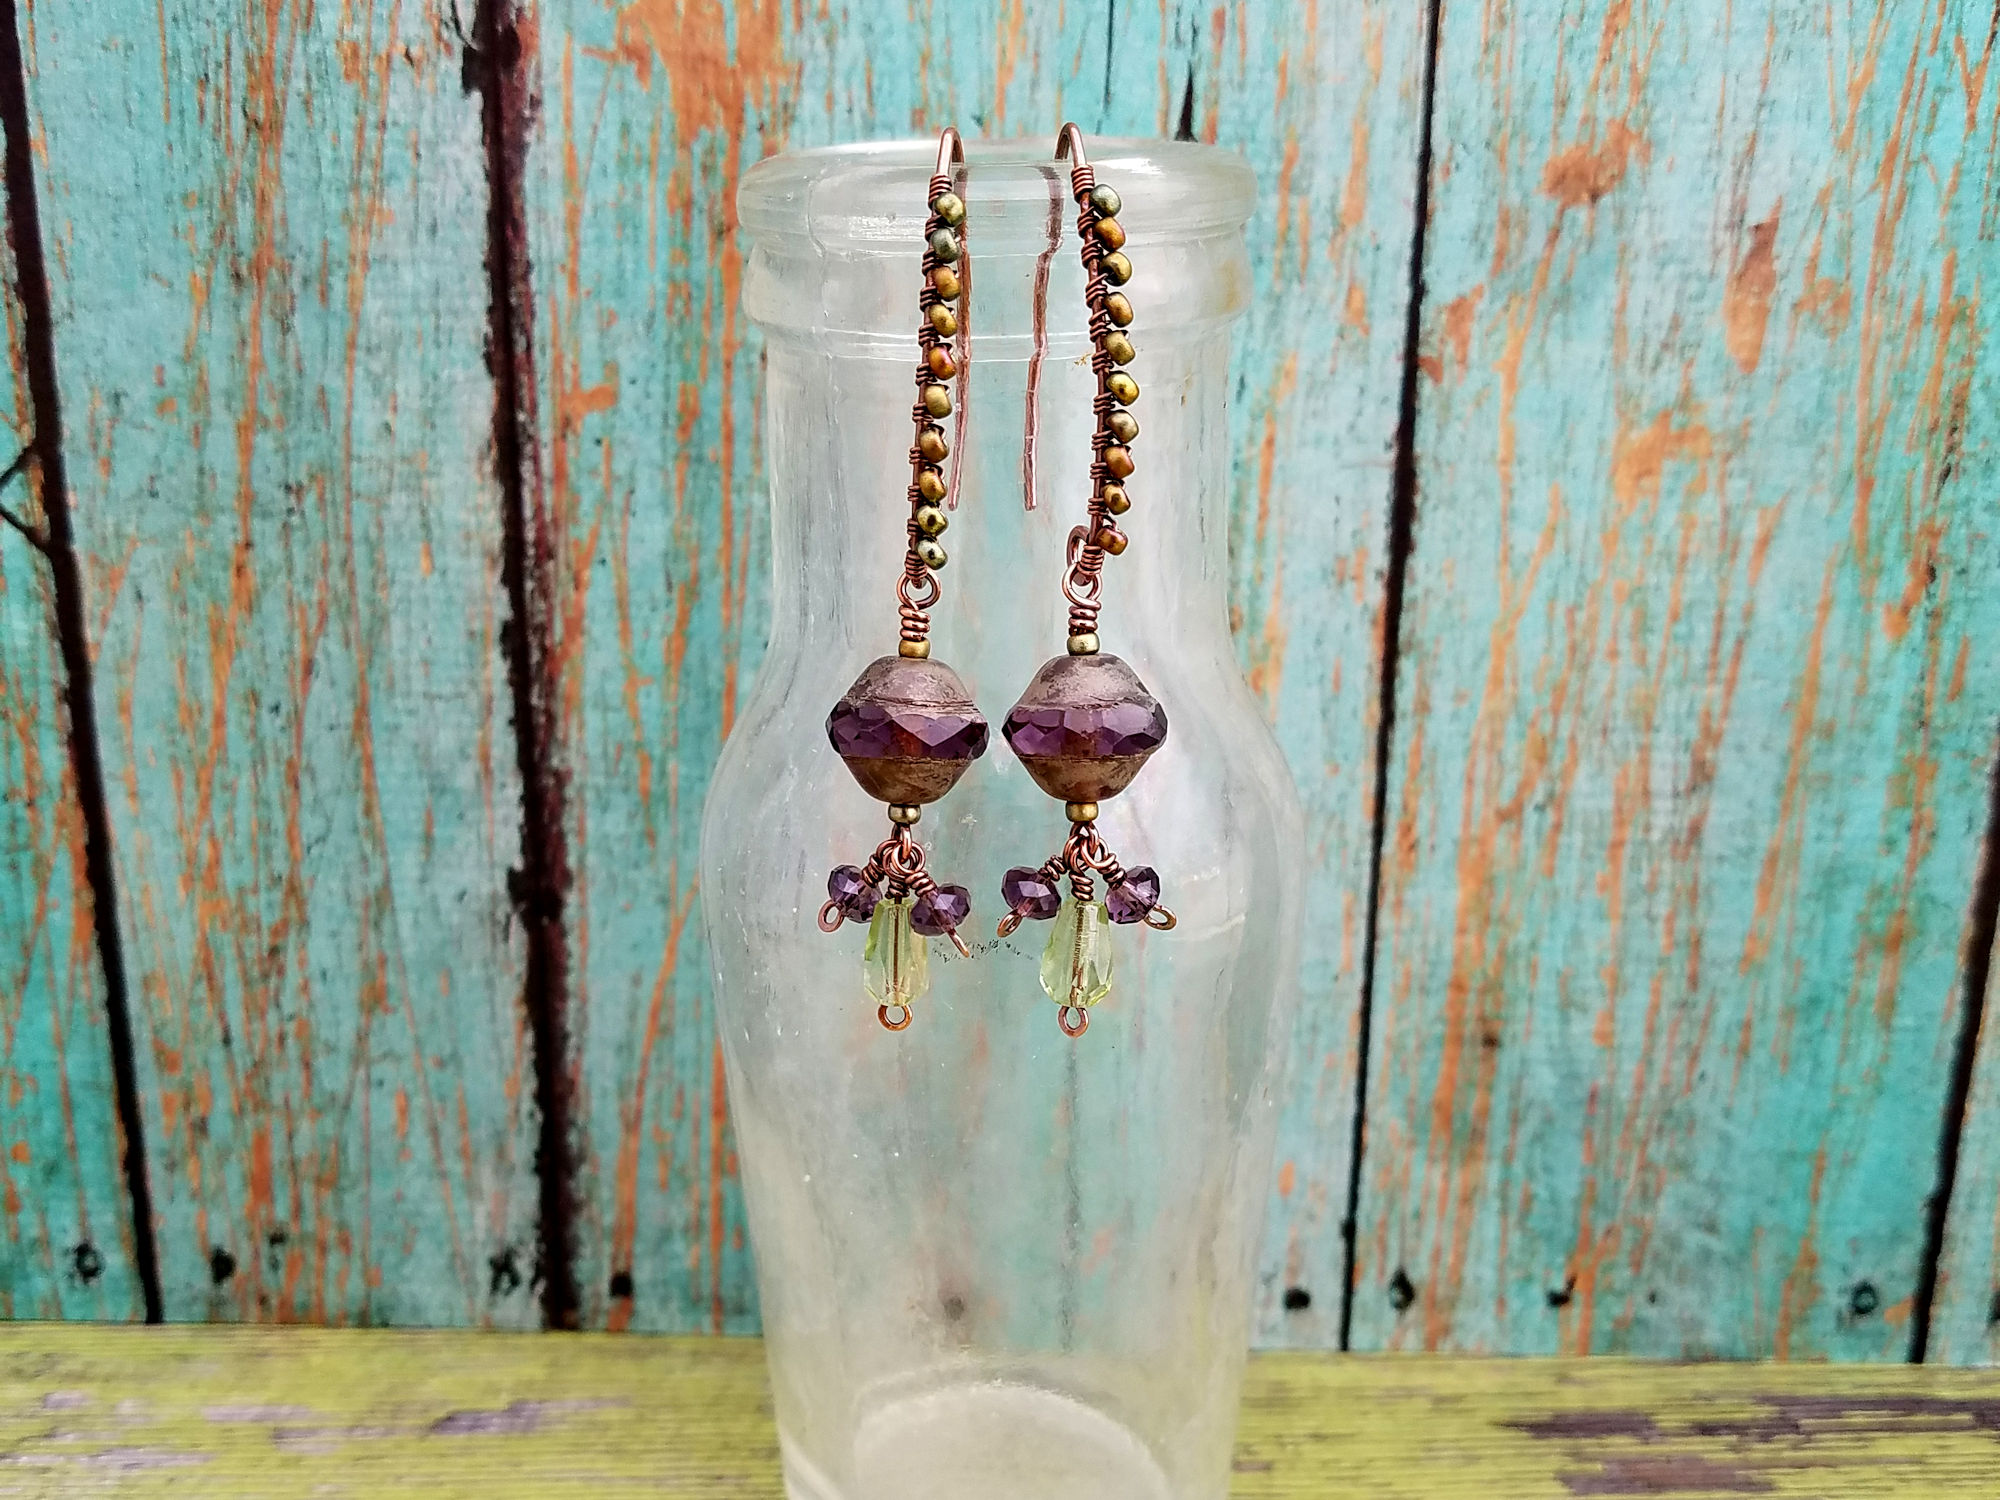 Make the Beaded Marquis Ear Wires - A free wire jewelry basics tutorial from Door 44 Studios - Cover Image